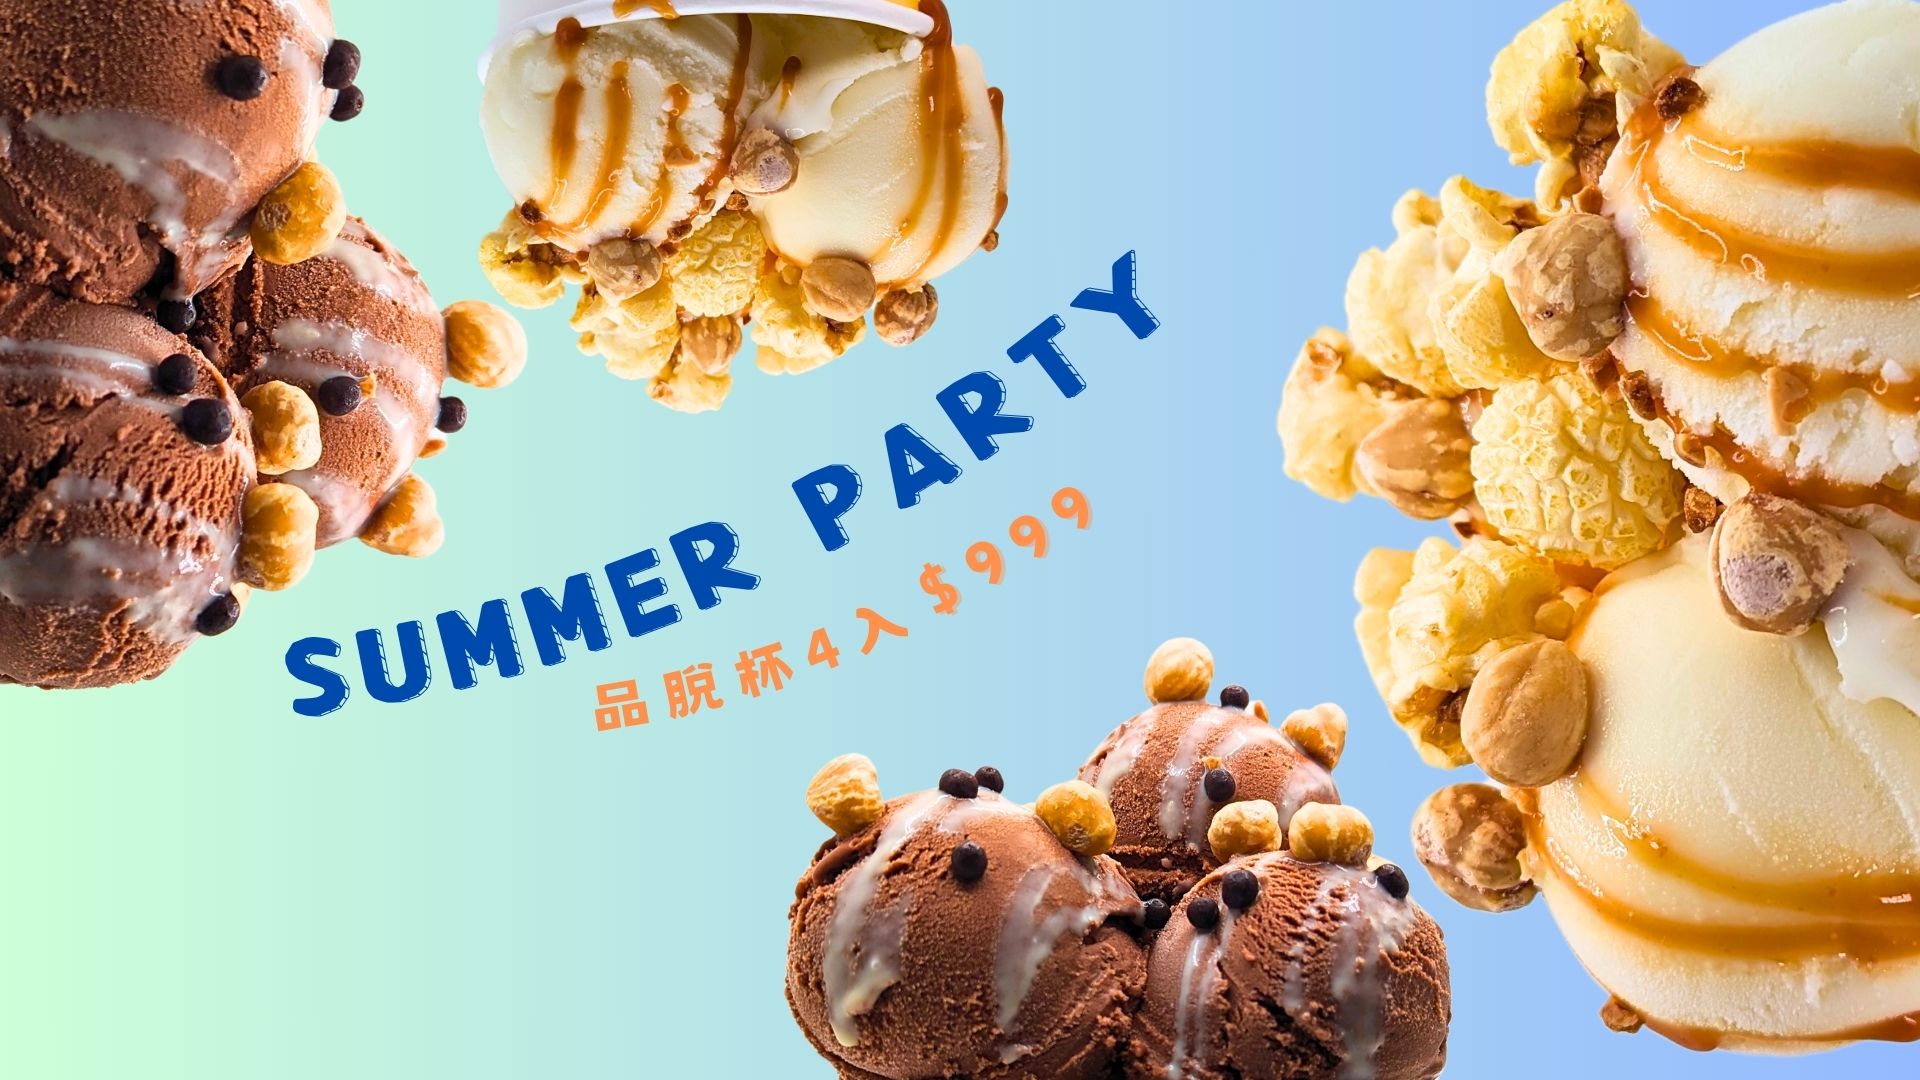 SUMMER PARTY 品脫杯4入$999